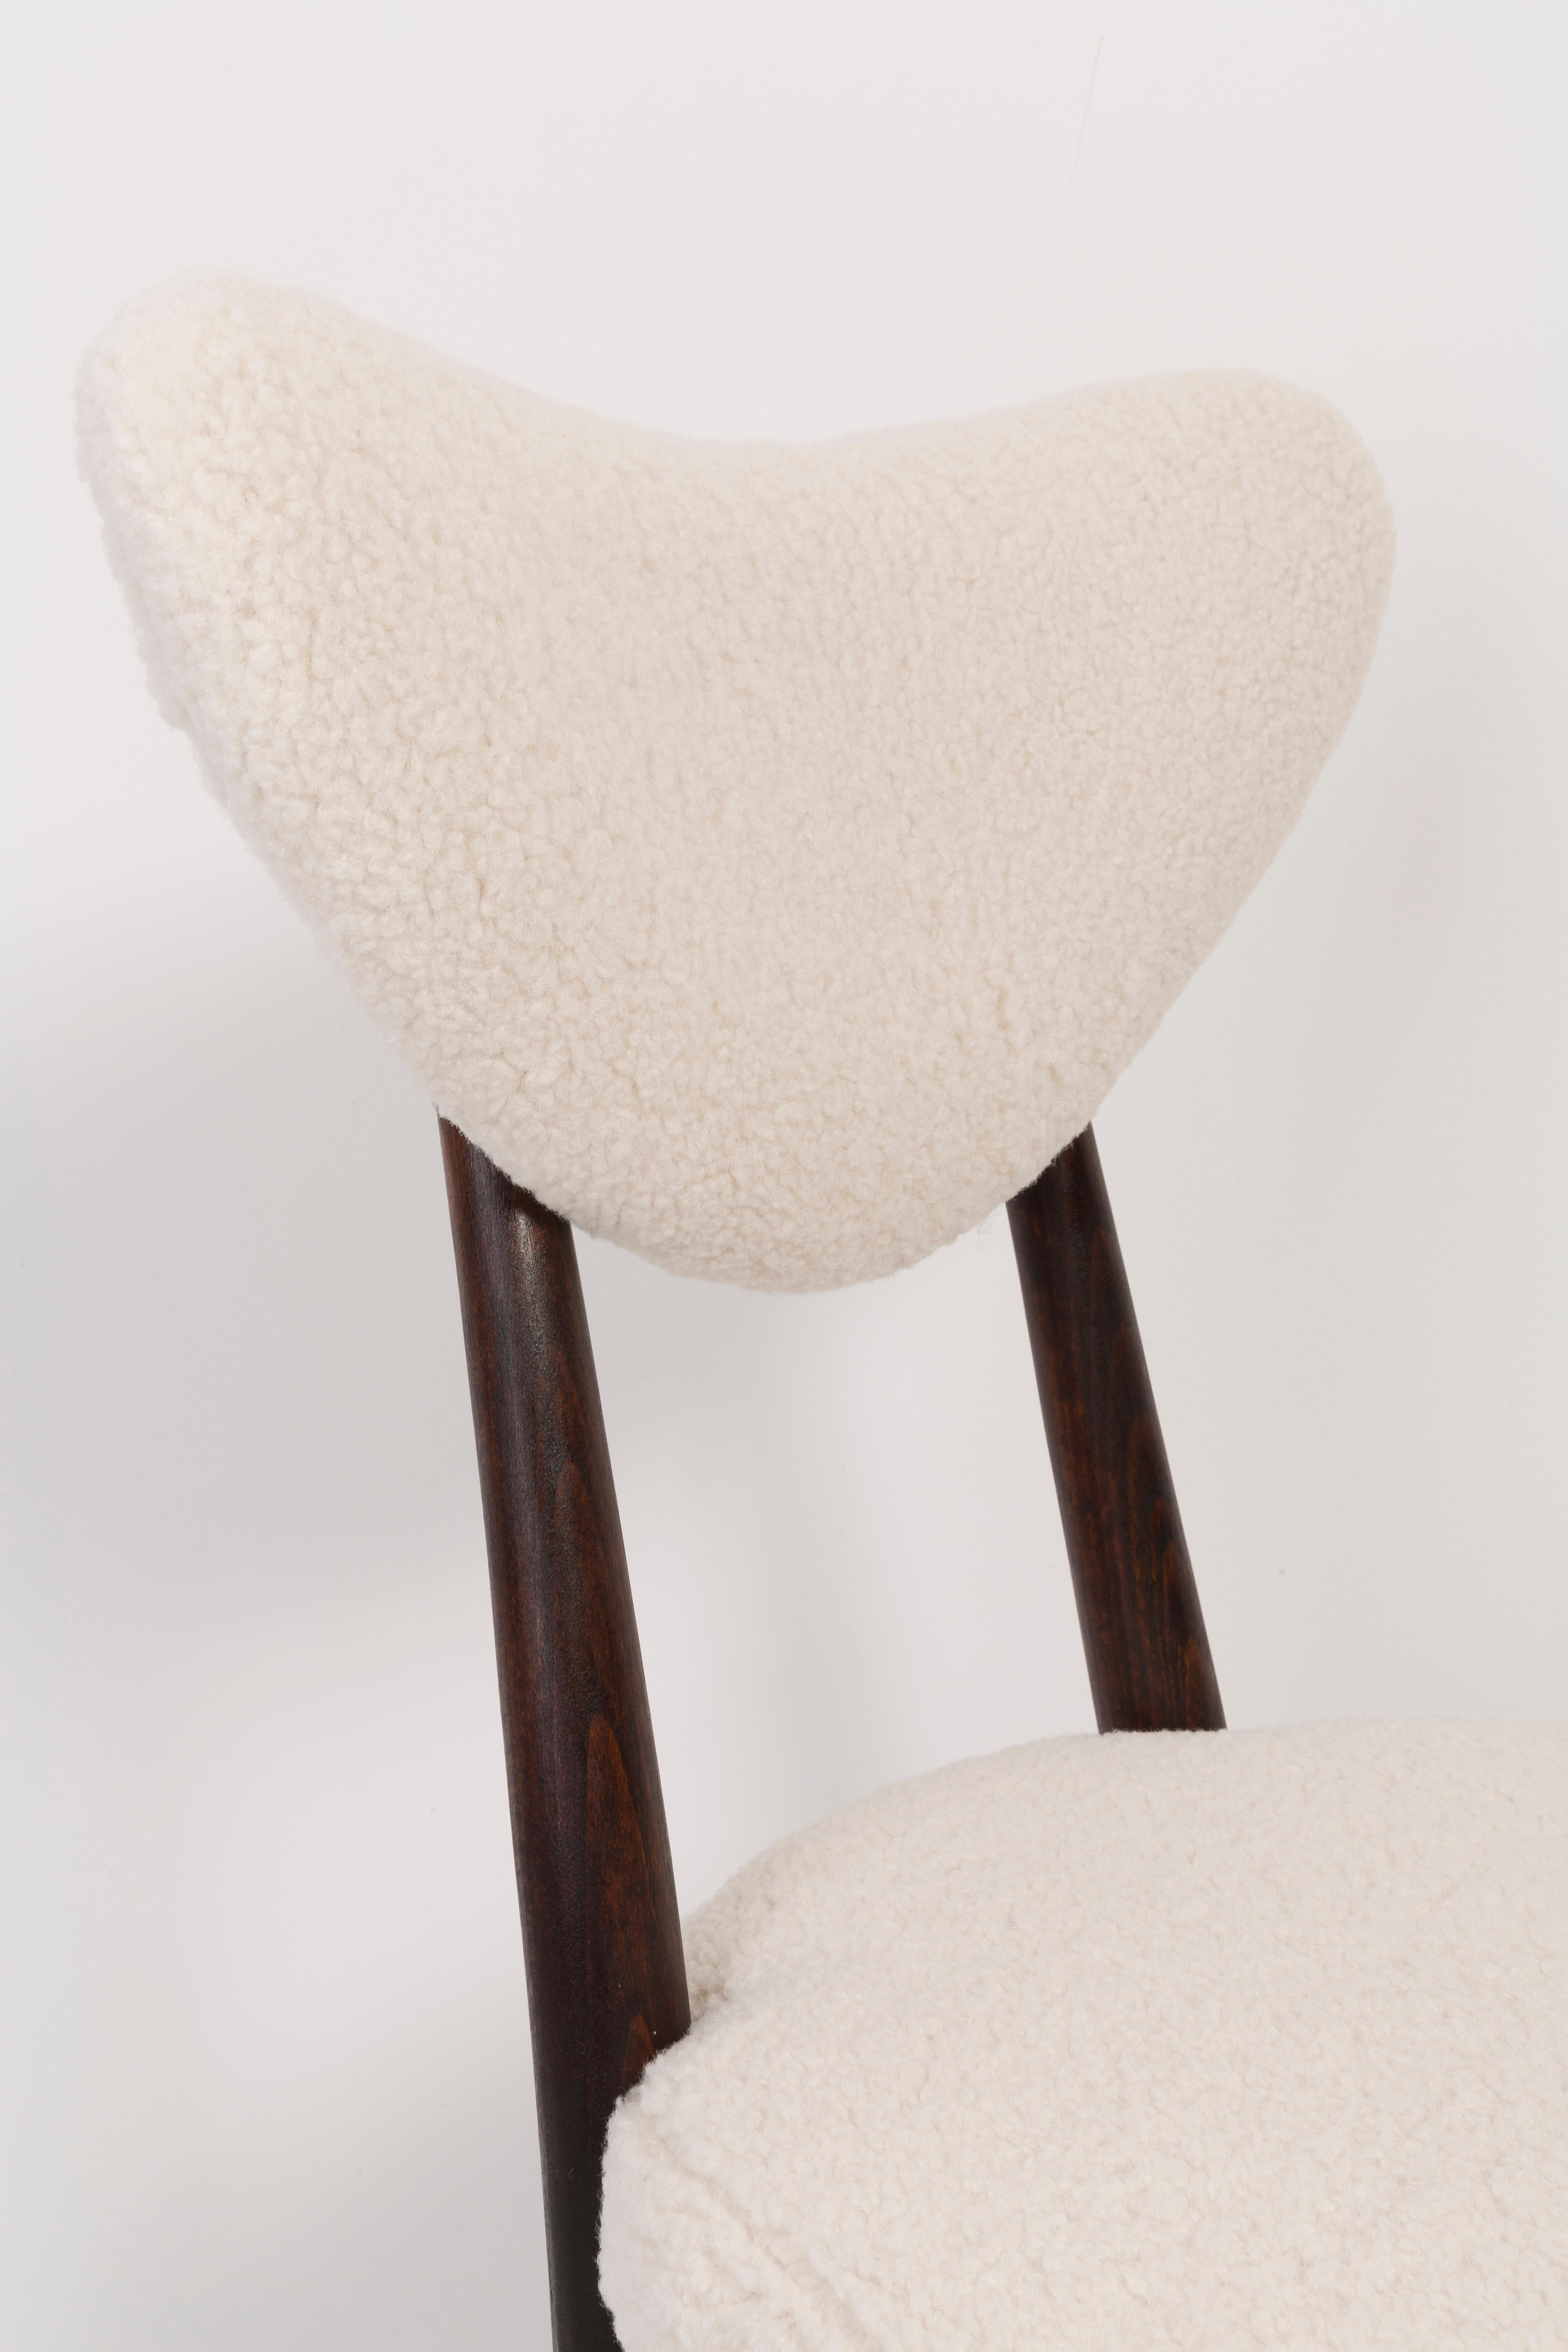 Twelve Light Boucle Heart Chairs, Europe, 1960s In Excellent Condition For Sale In 05-080 Hornowek, PL